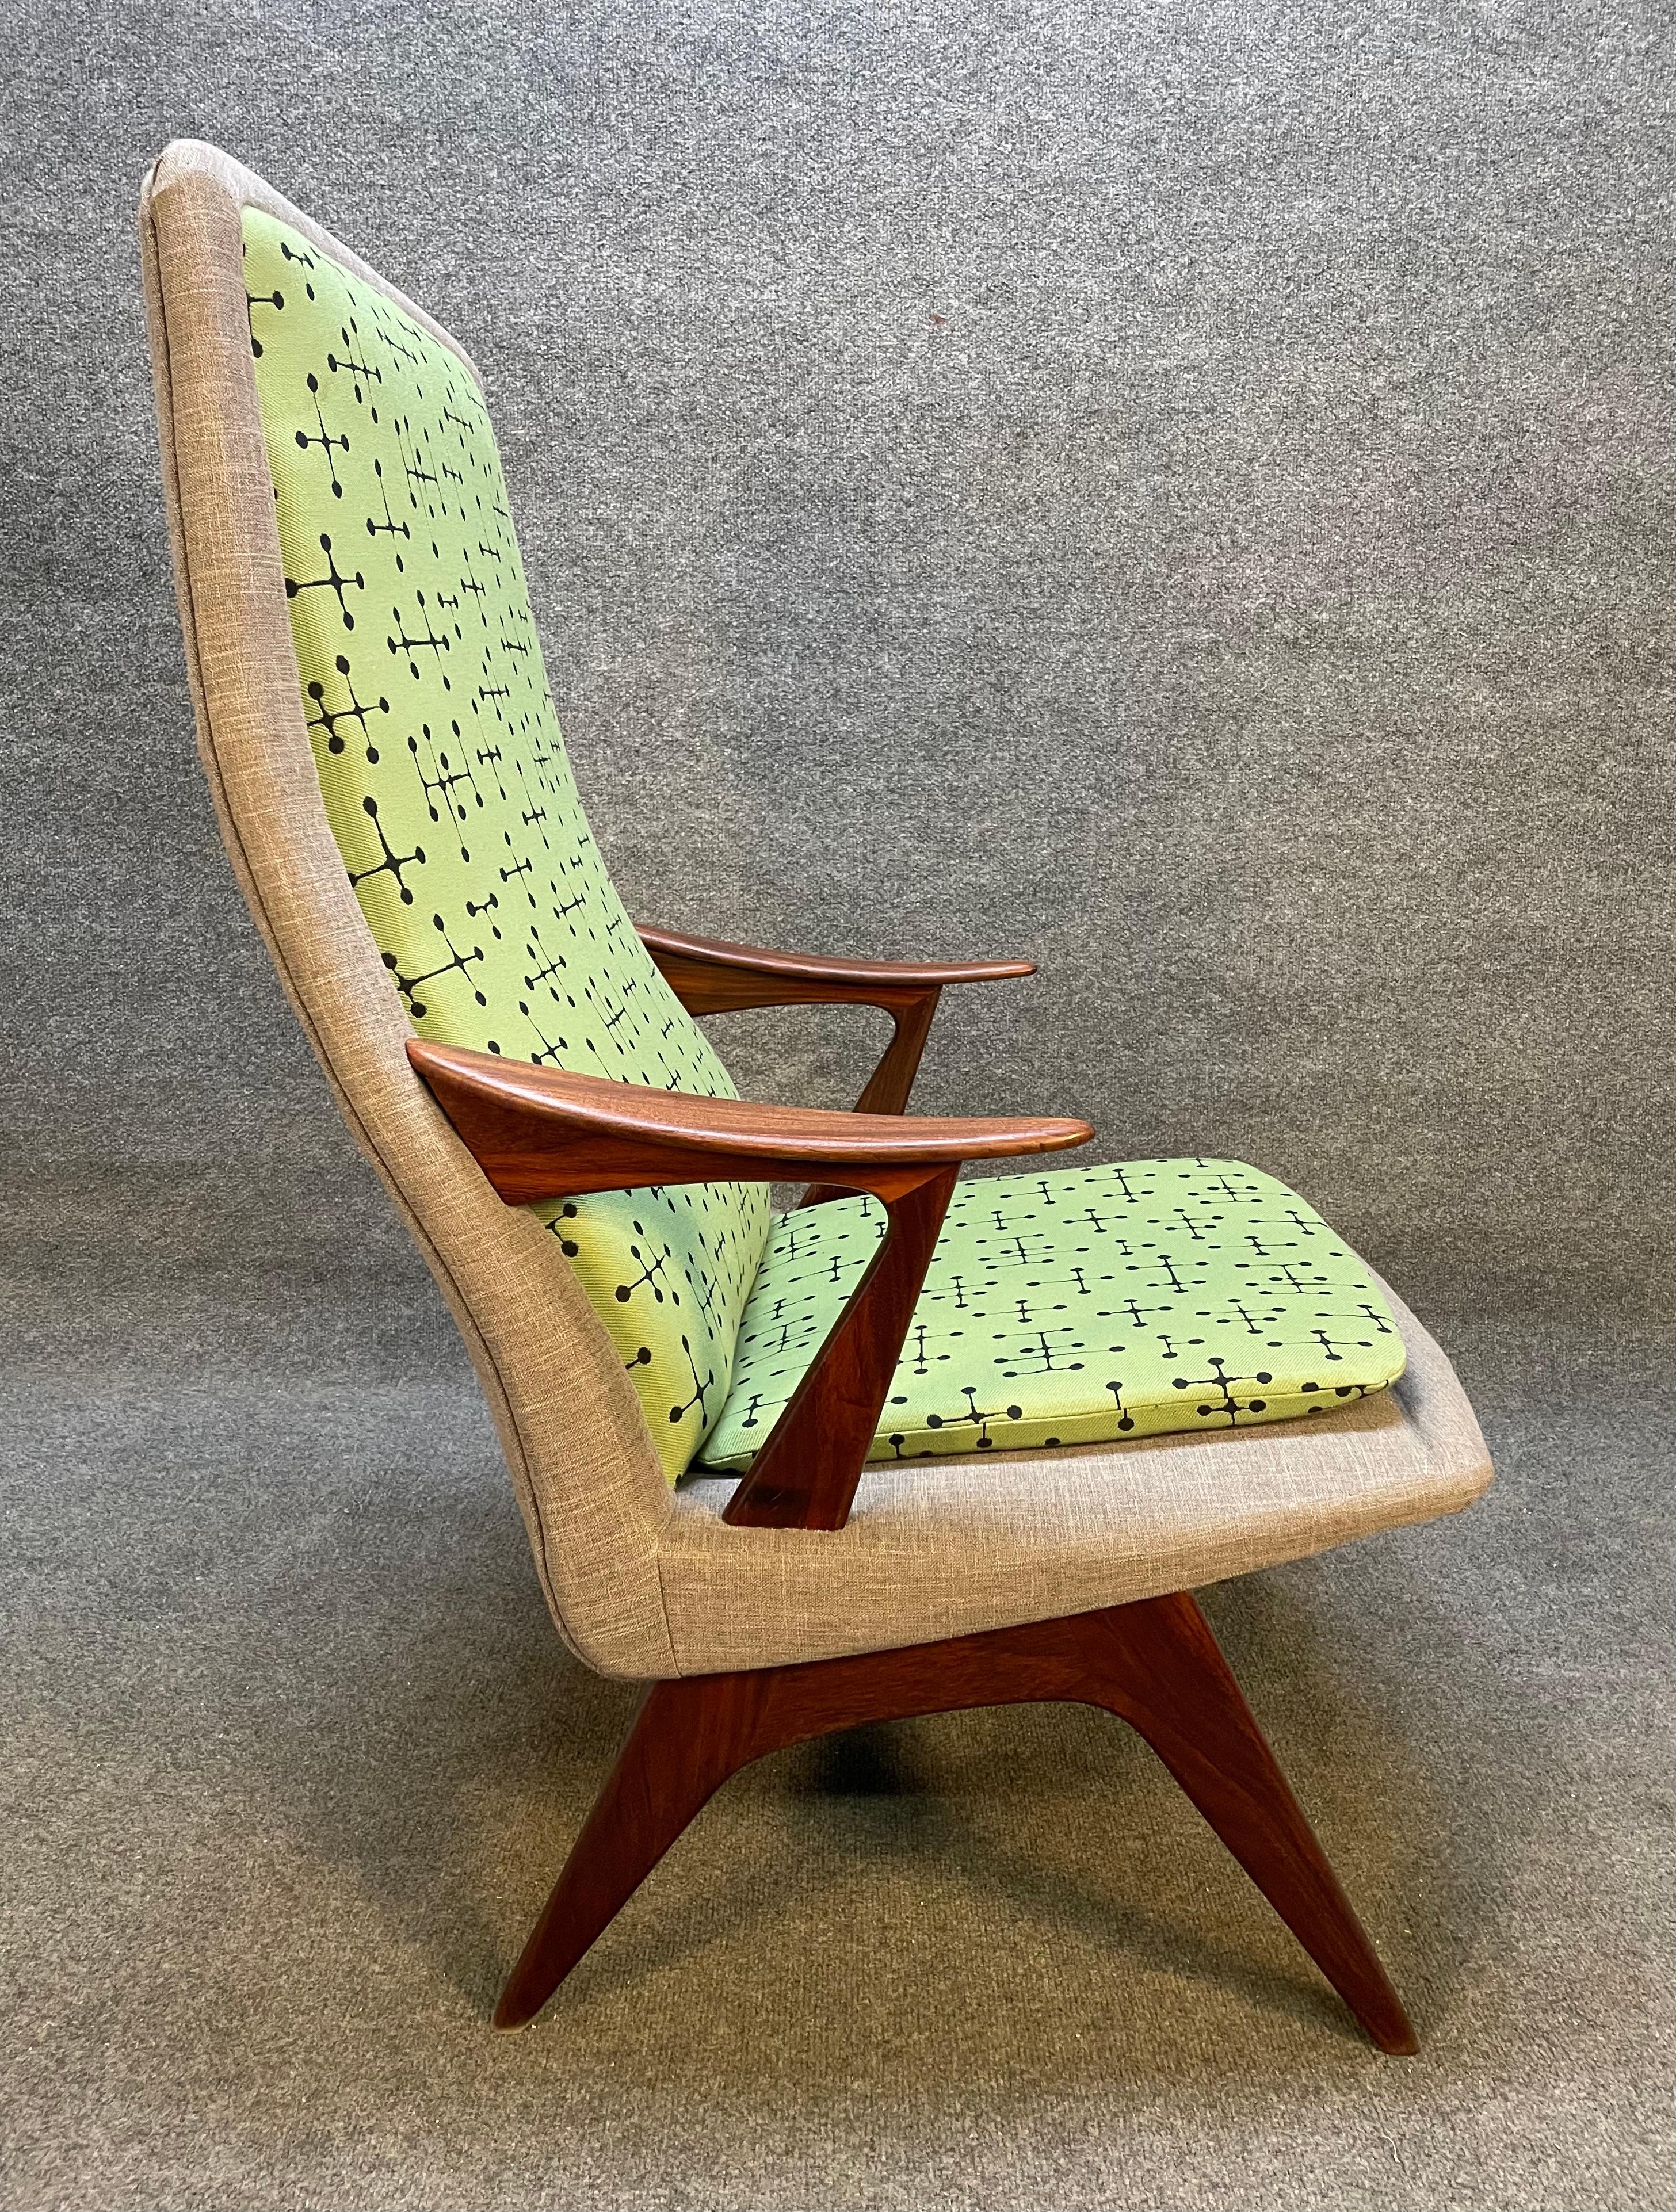 Here is a beautiful and rare scandinavian modern high back easy chair manufactured by Hjelle Mobeklfabrik in Norway in the 1960's.
This exquisite and comfortable chair, recently imported from Europe to California before its restoration, features a